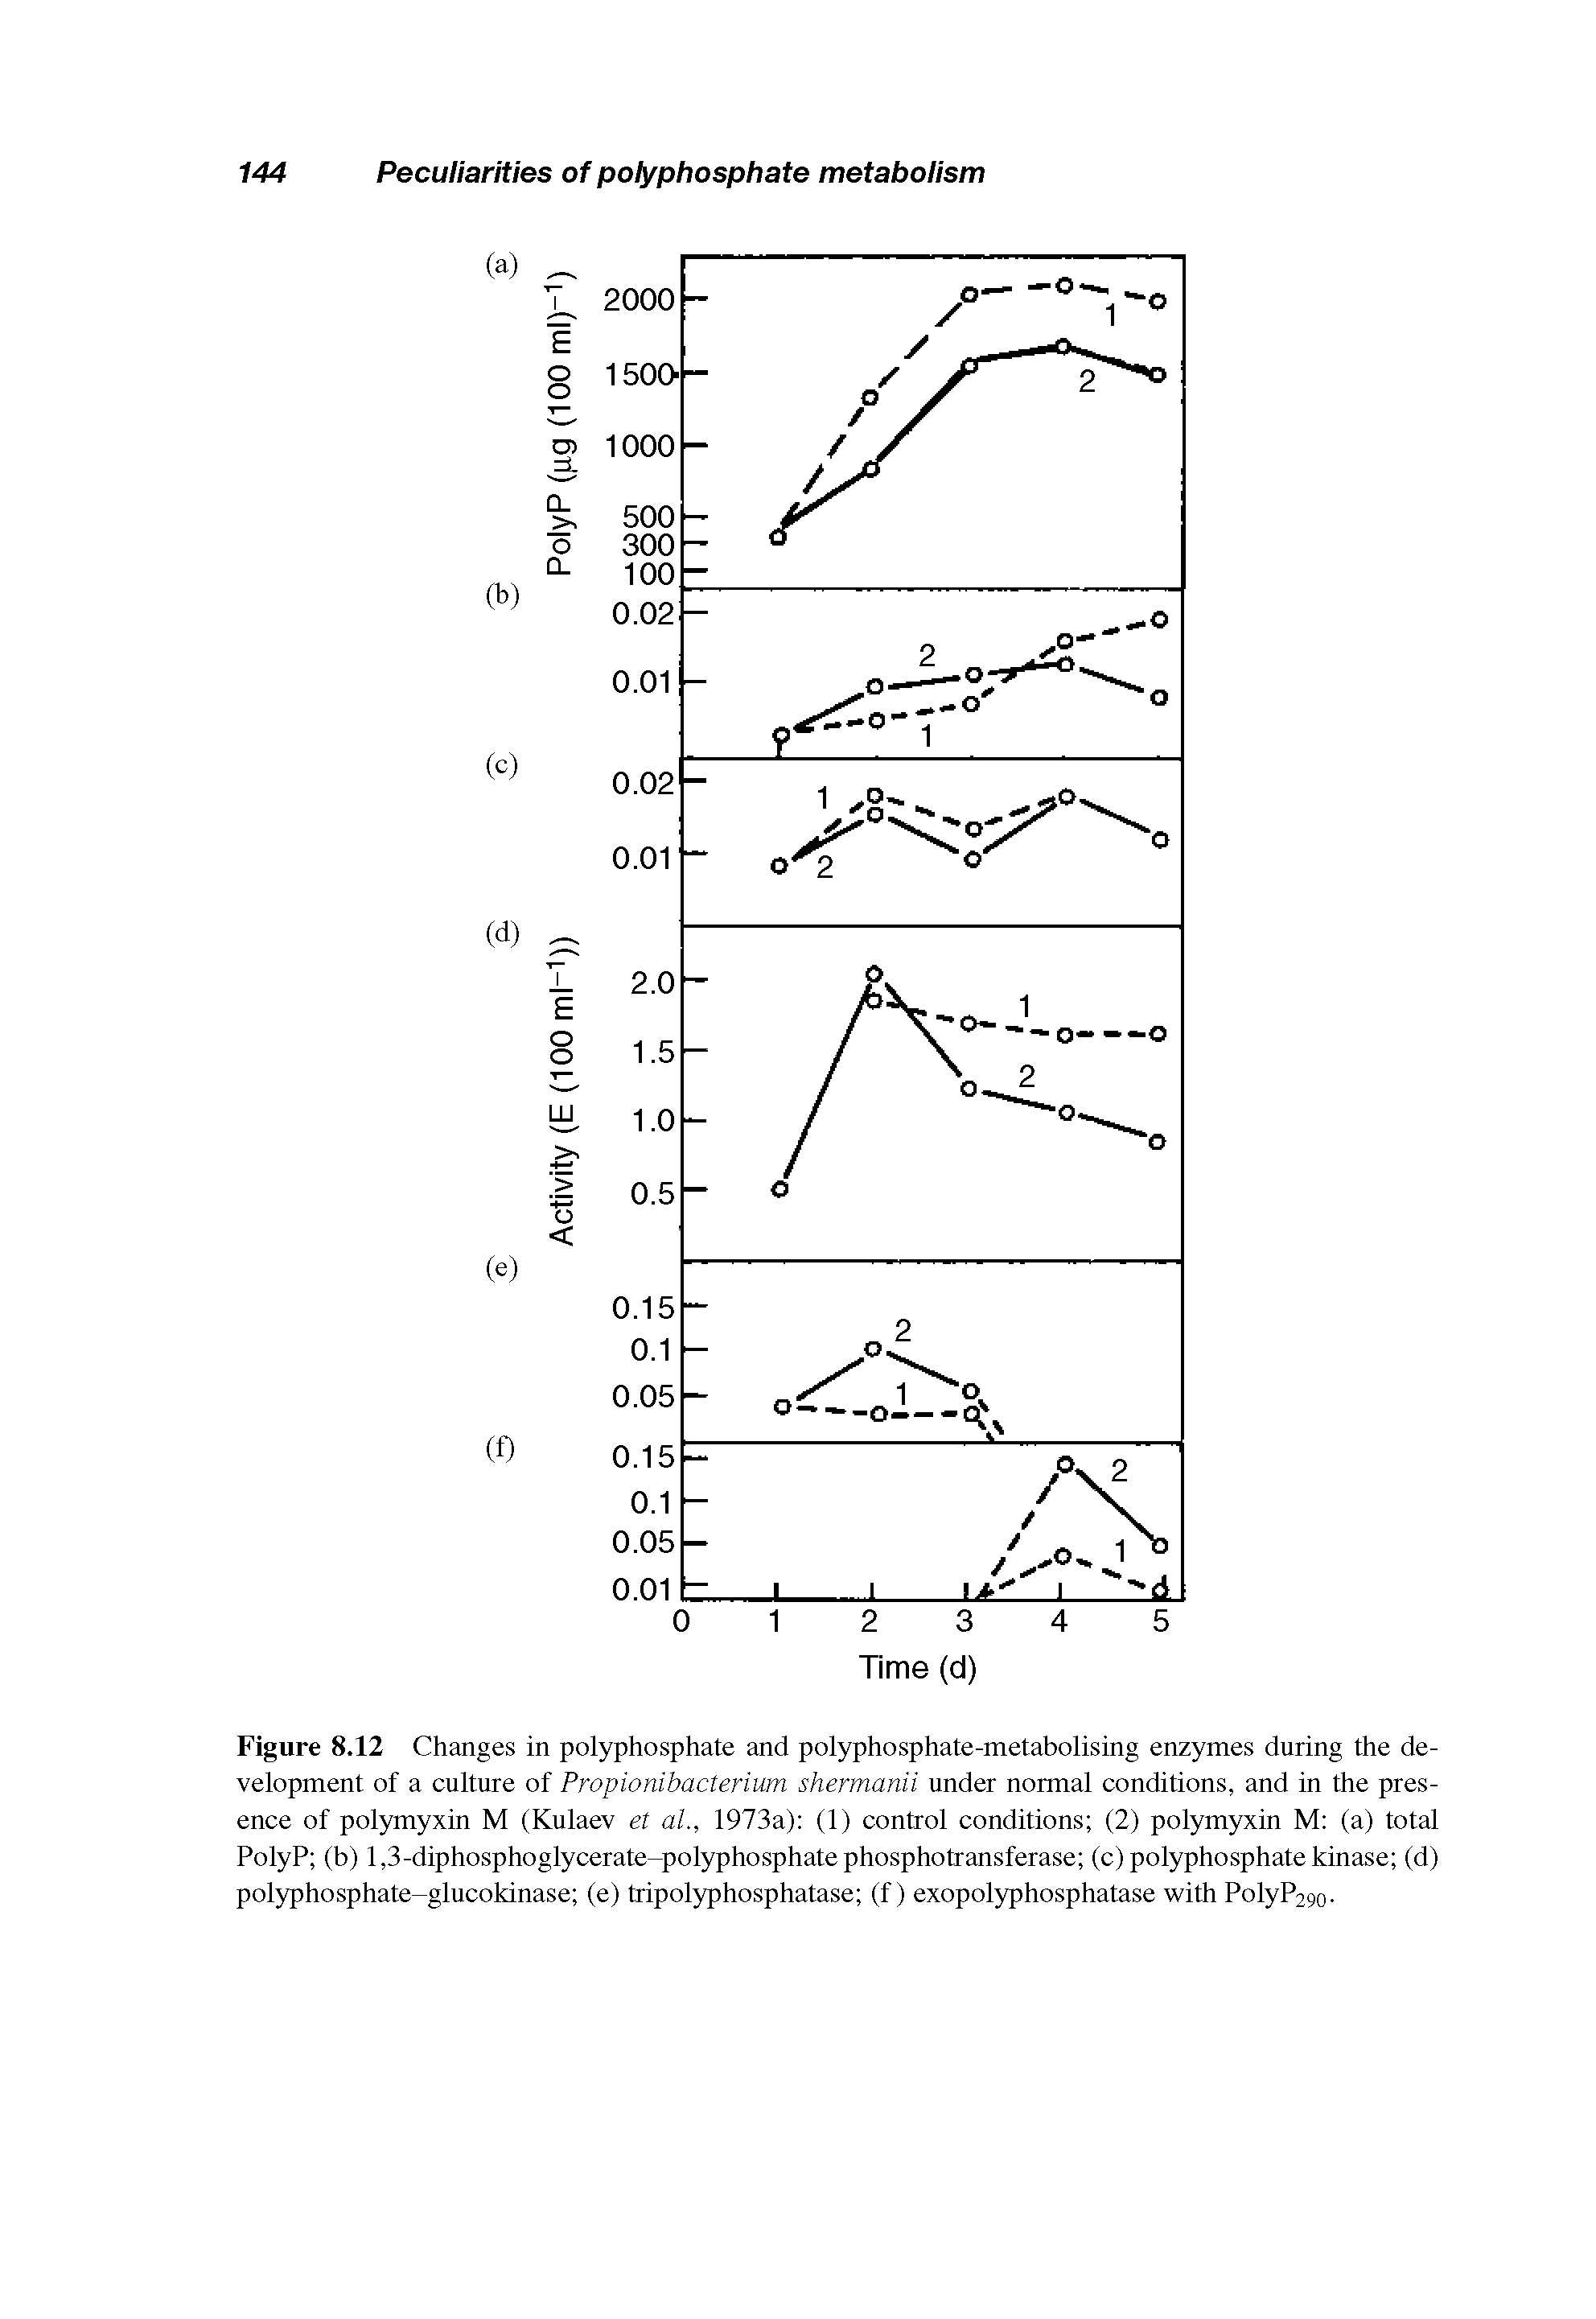 Figure 8.12 Changes in polyphosphate and polyphosphate-metabolising enzymes during the development of a culture of Propionibacterium shermanii under normal conditions, and in the presence of polymyxin M (Kulaev et al., 1973a) (1) control conditions (2) polymyxin M (a) total PolyP (b) 1,3-diphosphoglycerate-polyphosphate phosphotransferase (c) polyphosphate kinase (d) polyphosphate-glucokinase (e) tripolyphosphatase (f) exopolyphosphatase with PolyP29o.